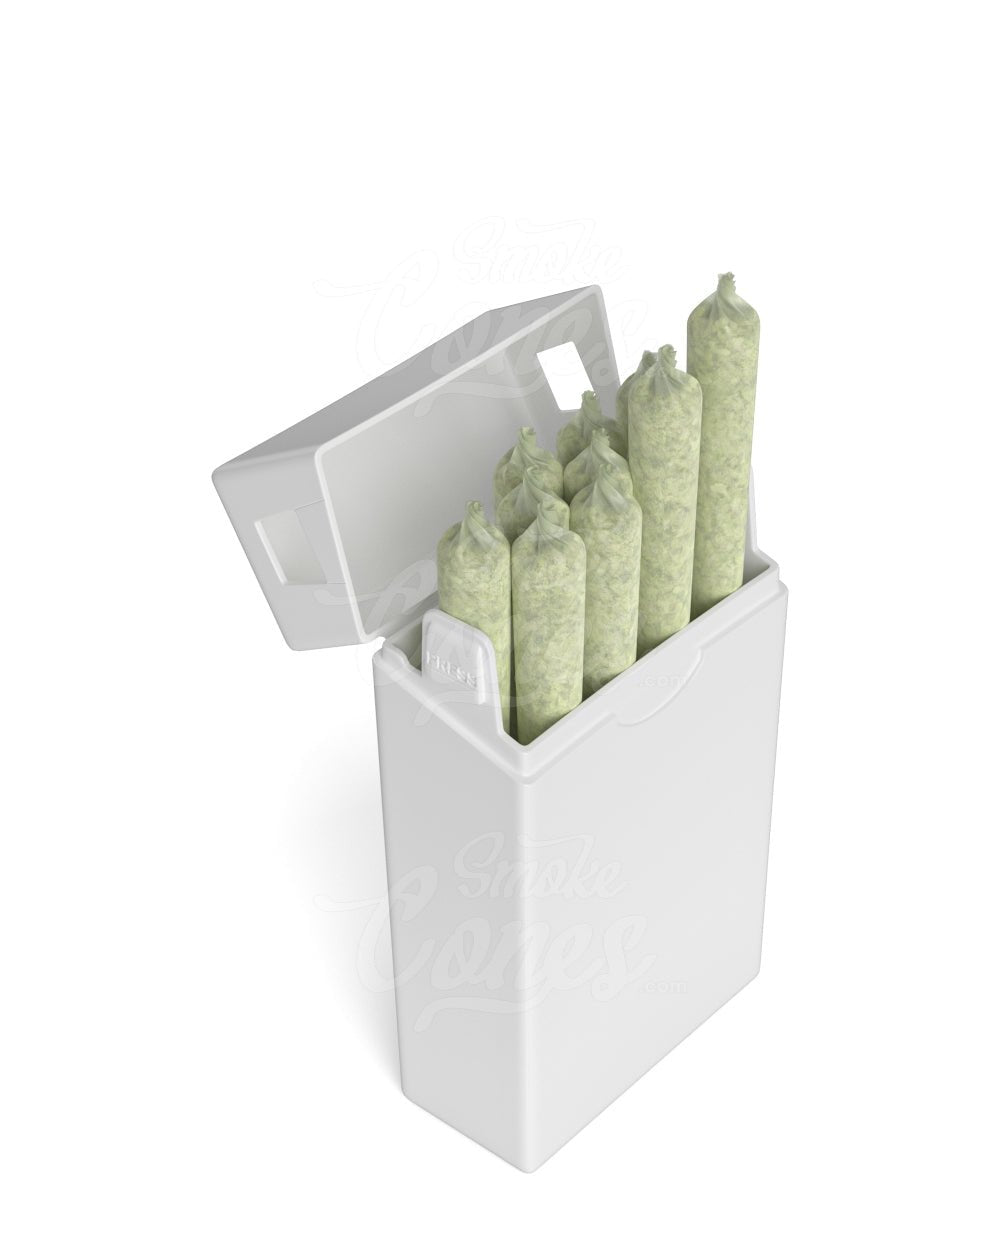 Joint holder case smell proof blunt holder free shipping